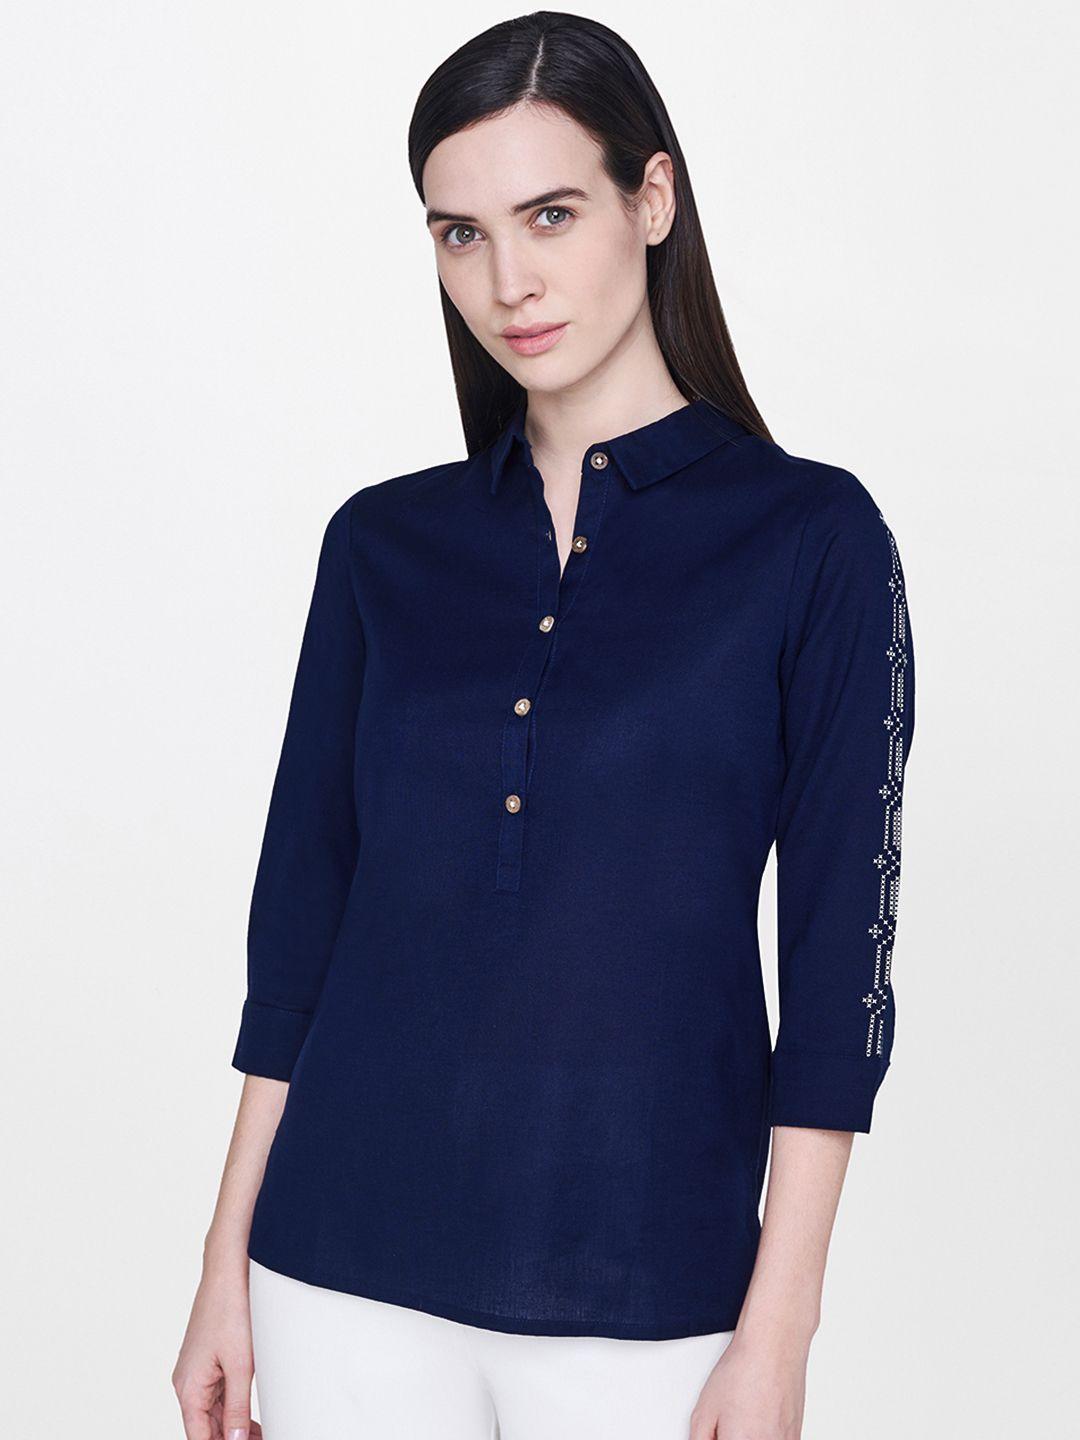 and women navy blue solid shirt style top